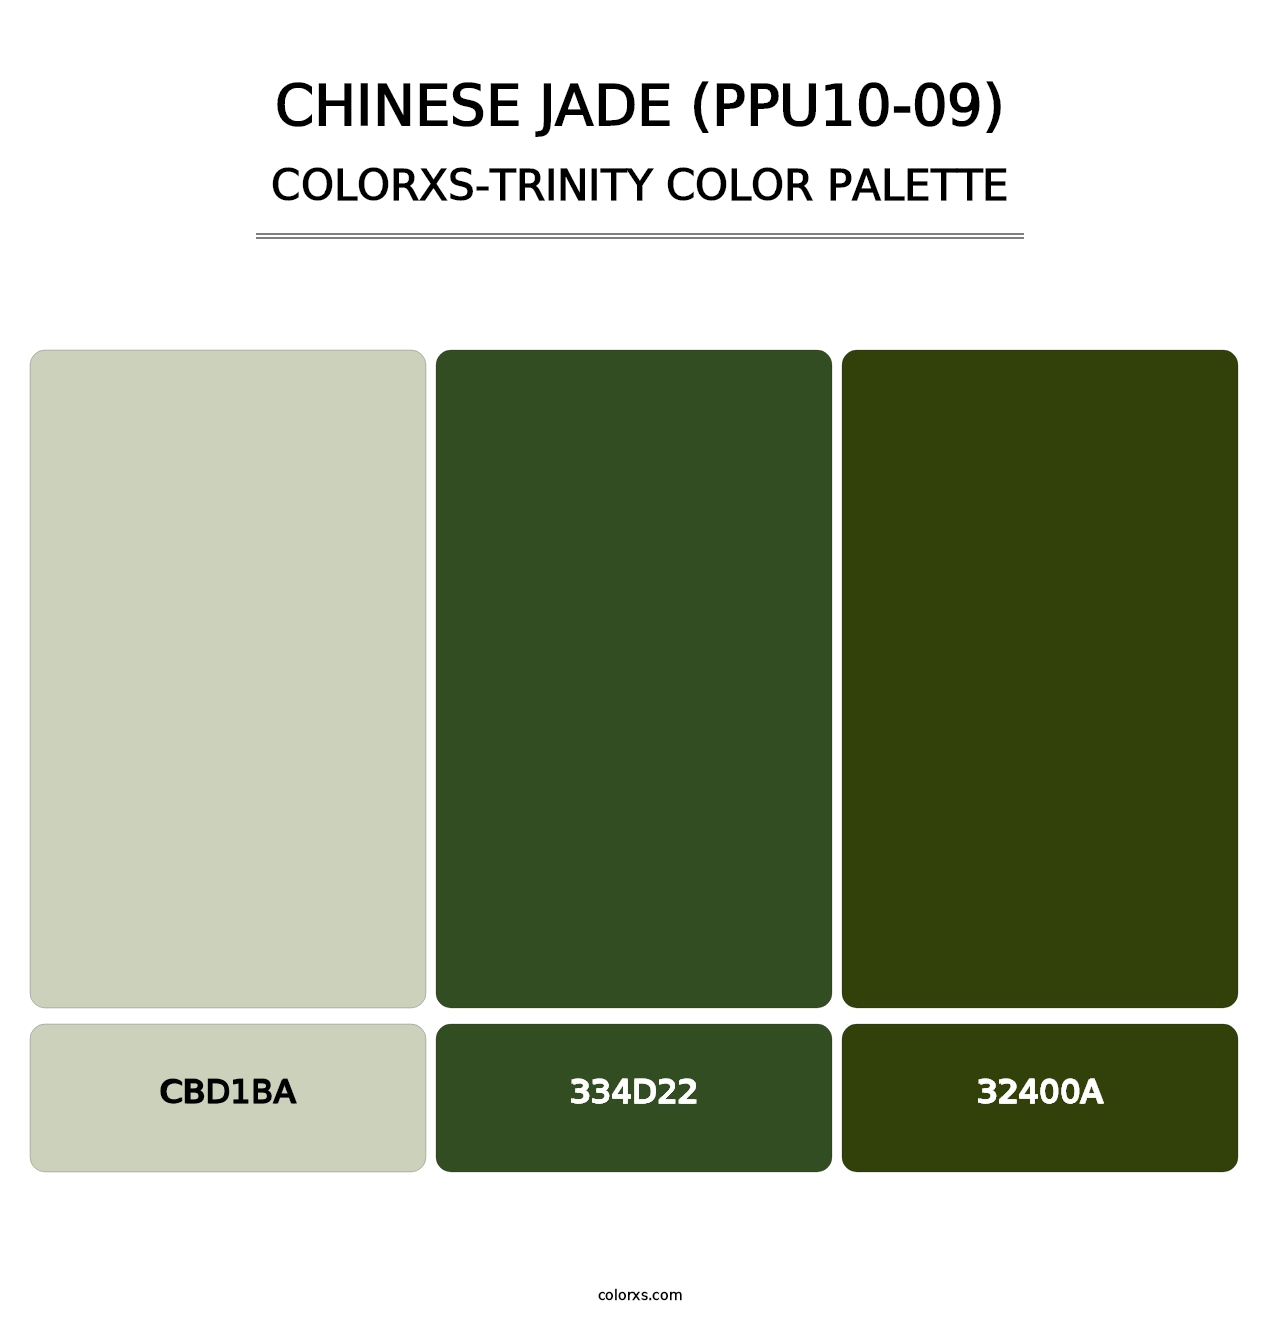 Chinese Jade (PPU10-09) - Colorxs Trinity Palette